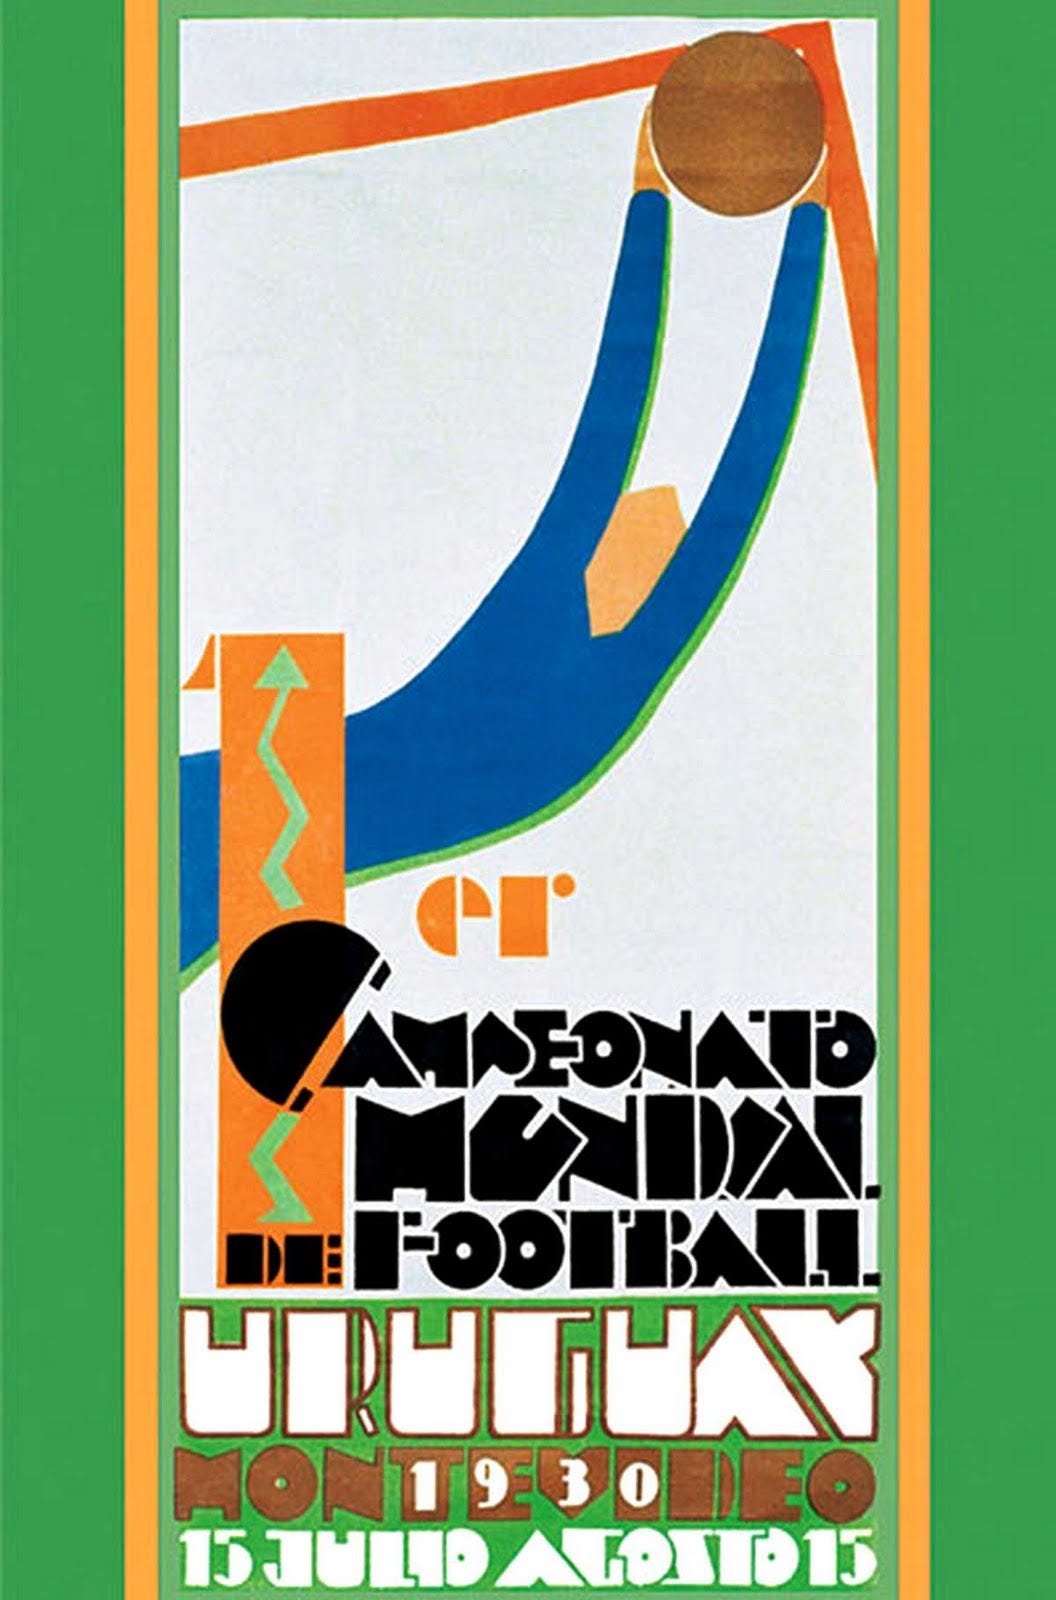 1930 FIFA World Cup Poster Public Domain Clip Art Photos and Images